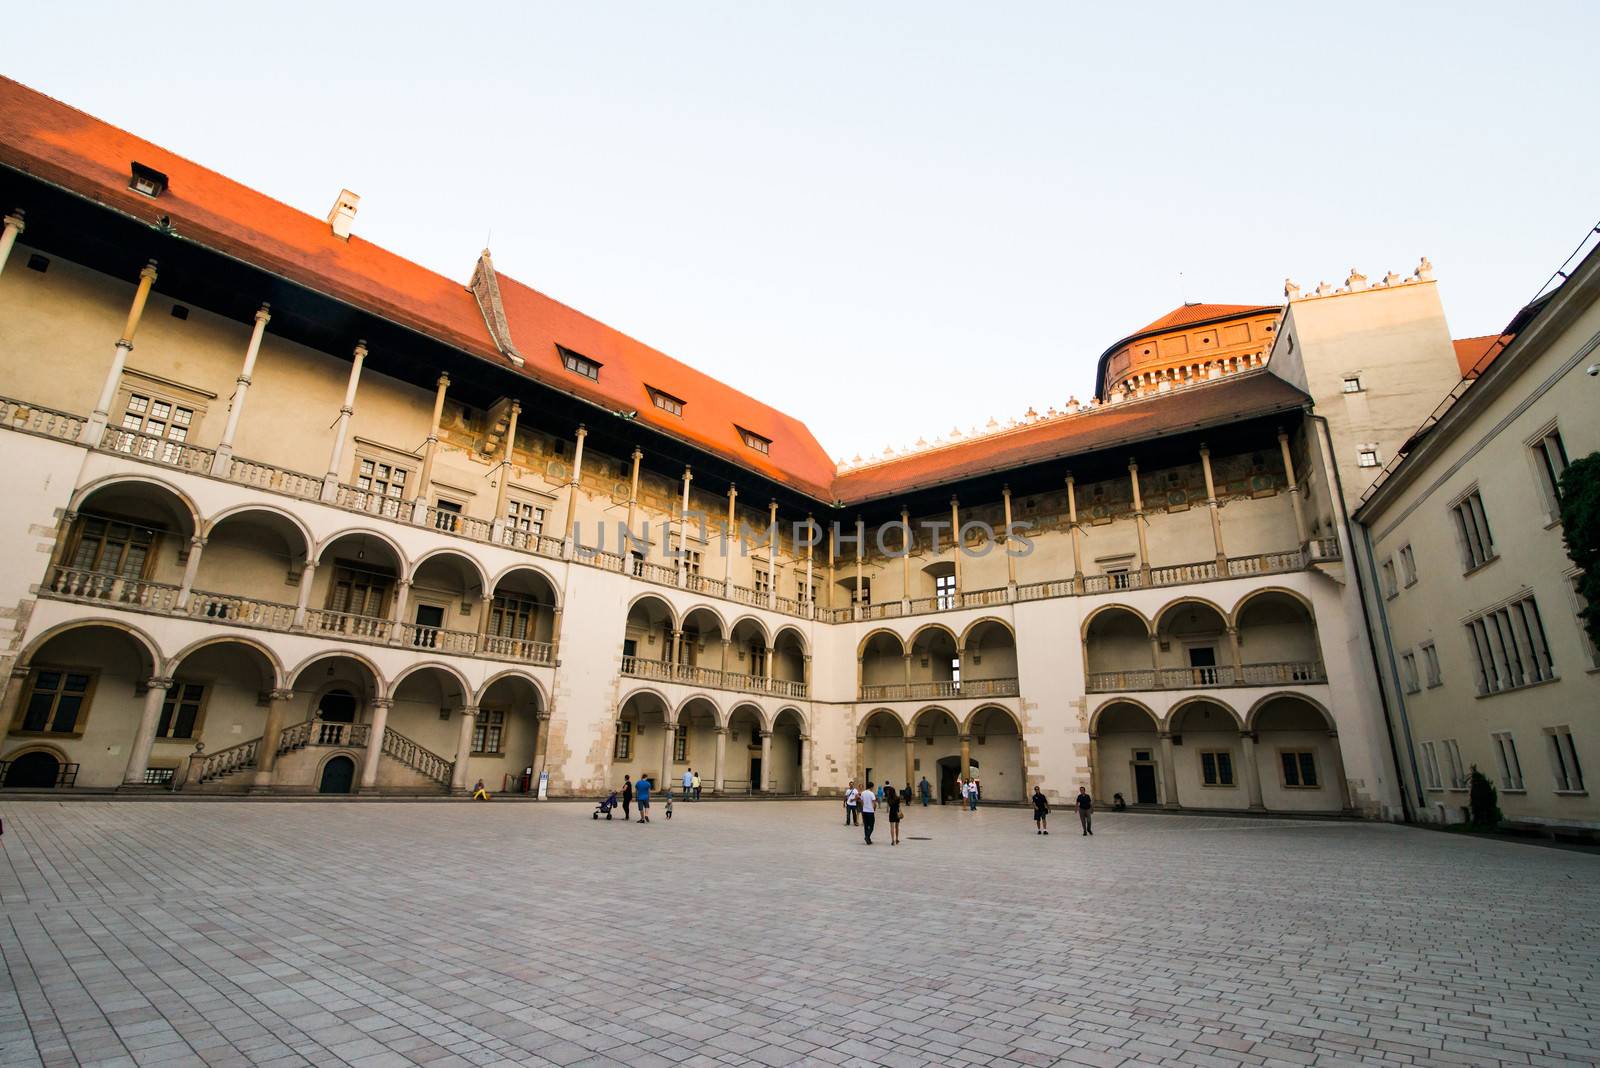 KRAKOW, POLAND - AUGUST 24: inner yard of royal palace on august 24 in Wawel in Krakow, Poland. The monument to the history of the Decree of the President Lech Walesa on September 8, 1994.